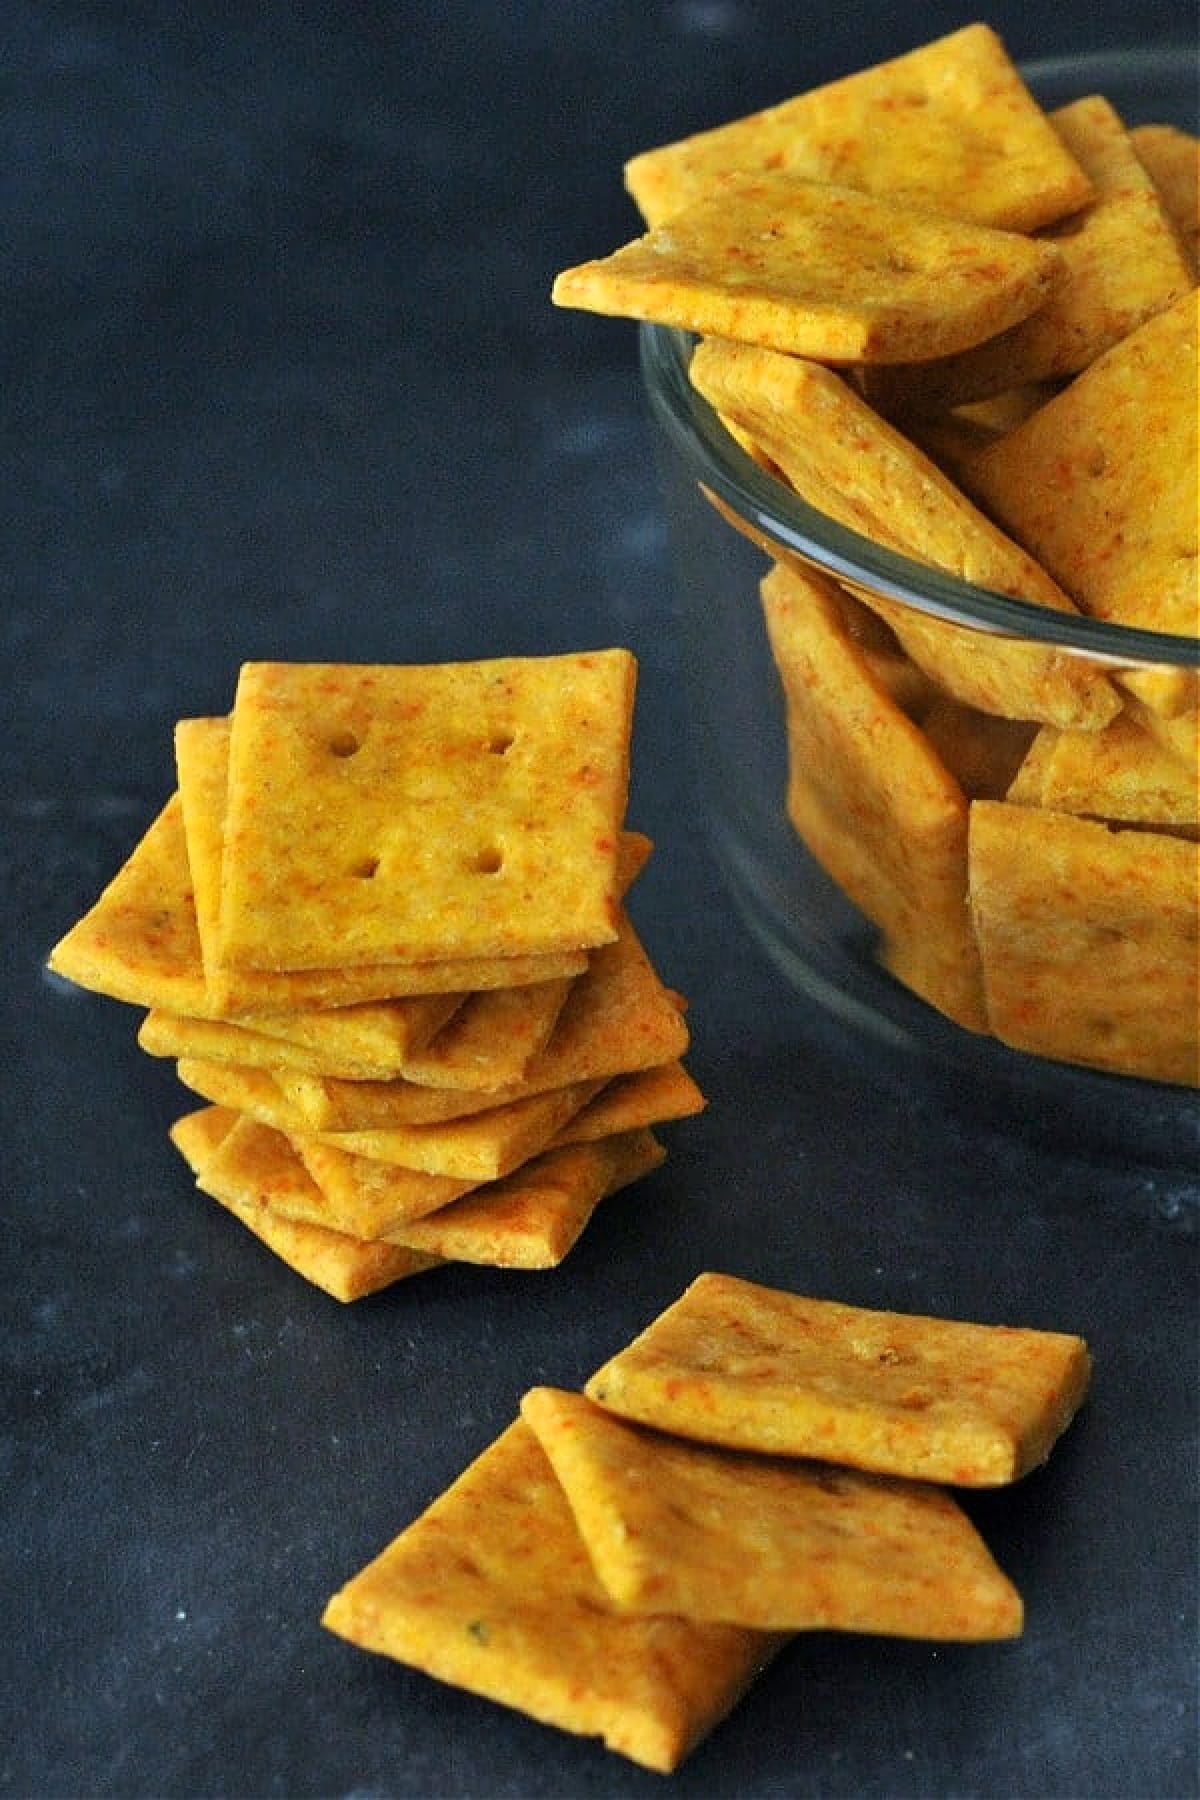 A stack and a bowl of gluten free cheese crackers.